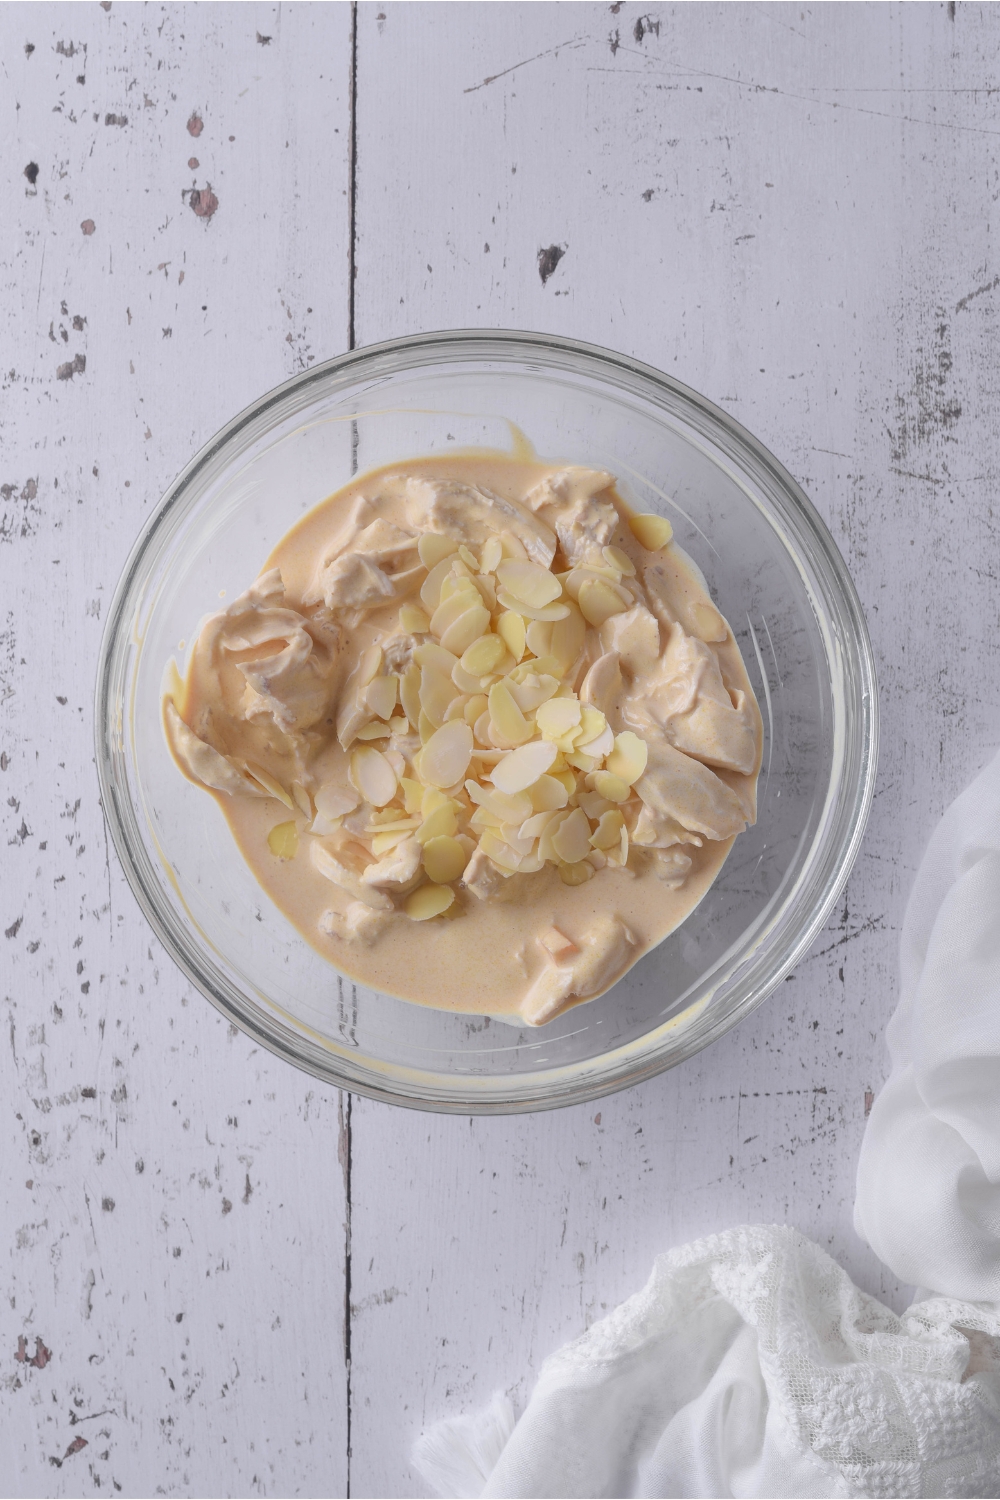 A clear bowl filled with cooked and shredded chicken in a creamy sauce and slivered almonds atop the chicken.